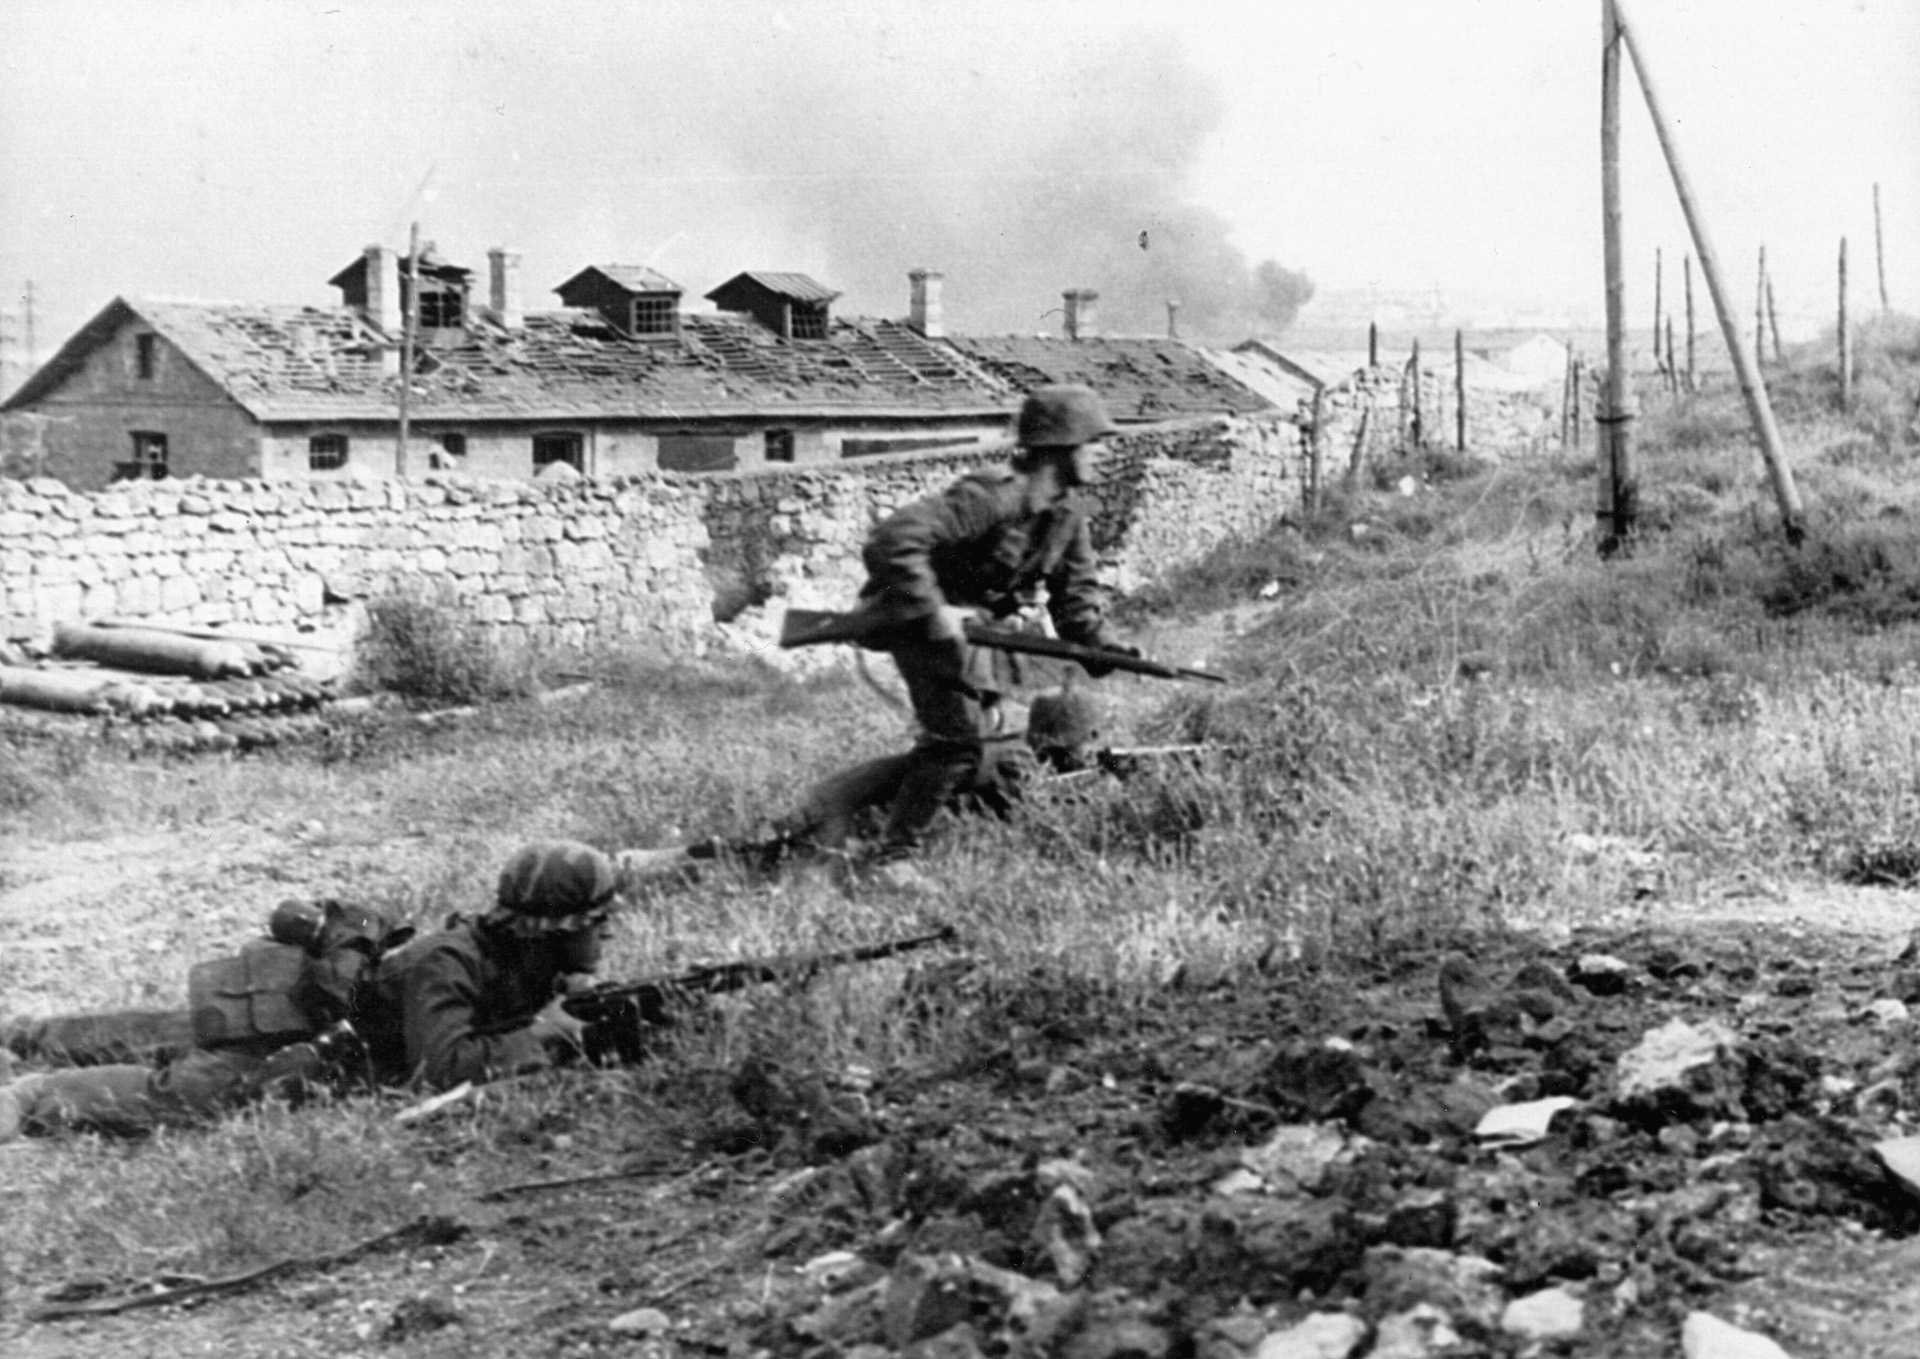 A German soldier exposes himself to Soviet gunfire as he attempts to push forward. His comrades continue to lie low behind the limited cover of a small embankment.